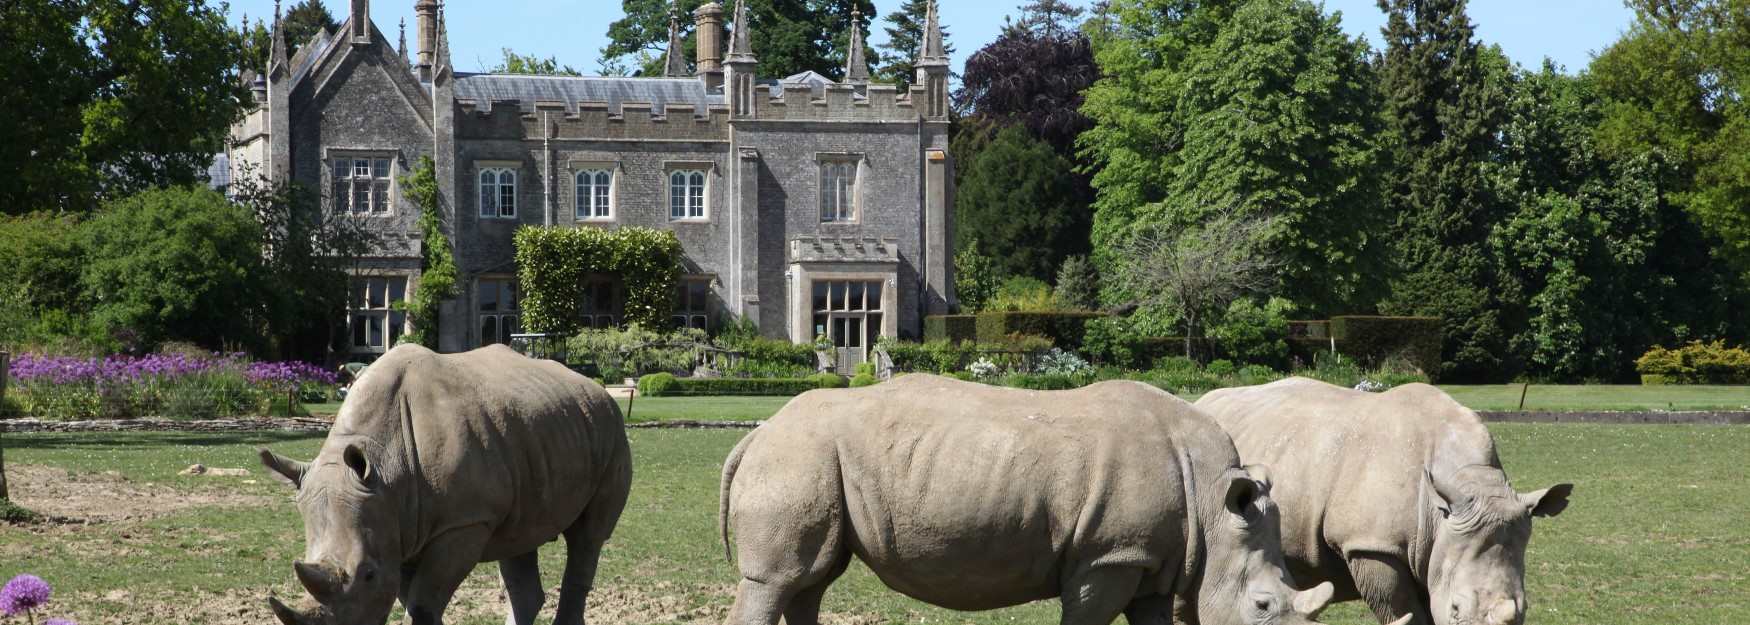 Rhinos grazing on the lawn at Cotswold Wildlife Park